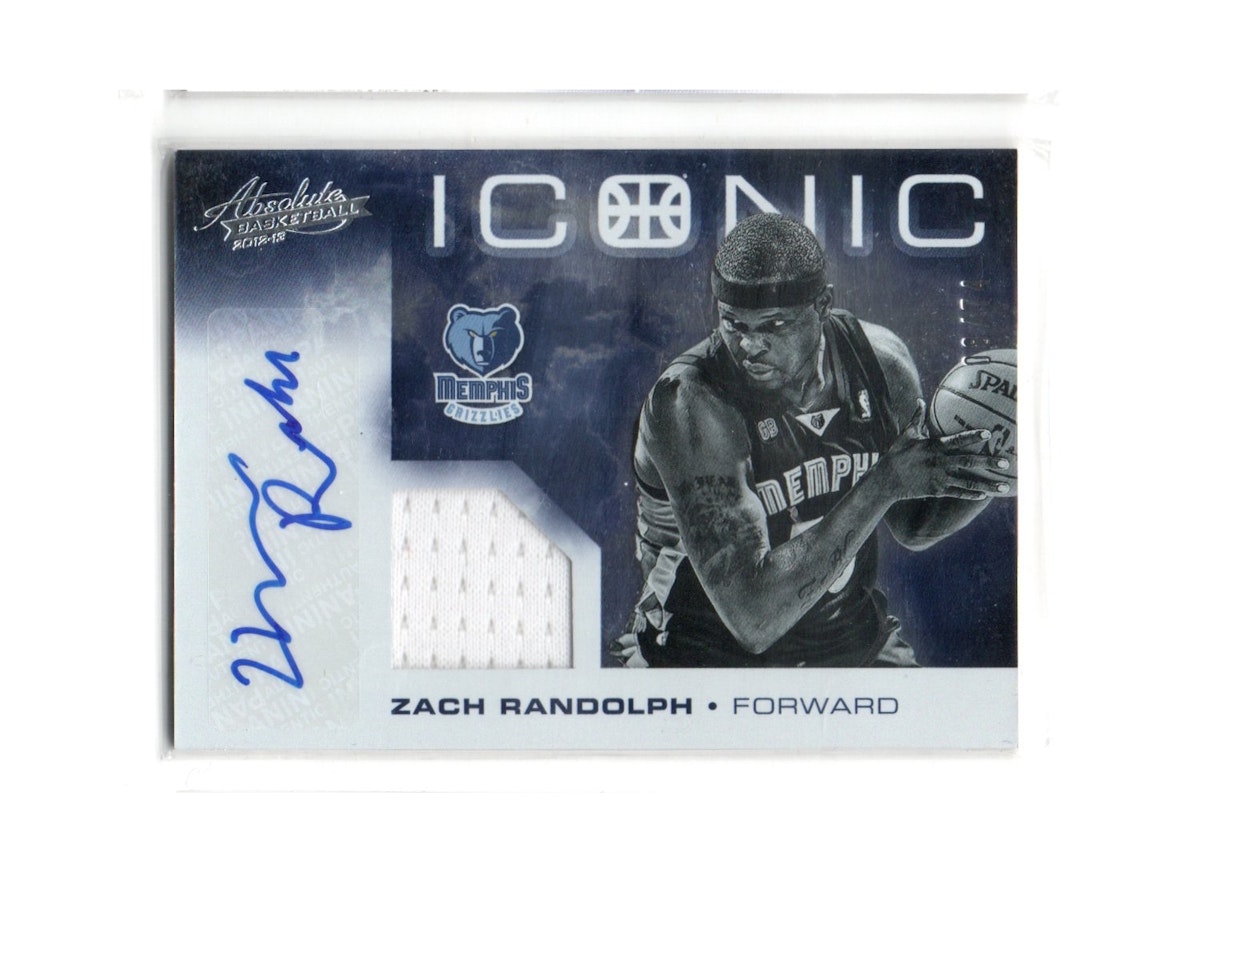 2012-13 Absolute Iconic Materials Autographs #21 Zach Randolph (150-X259-NBAGRIZZLIES)